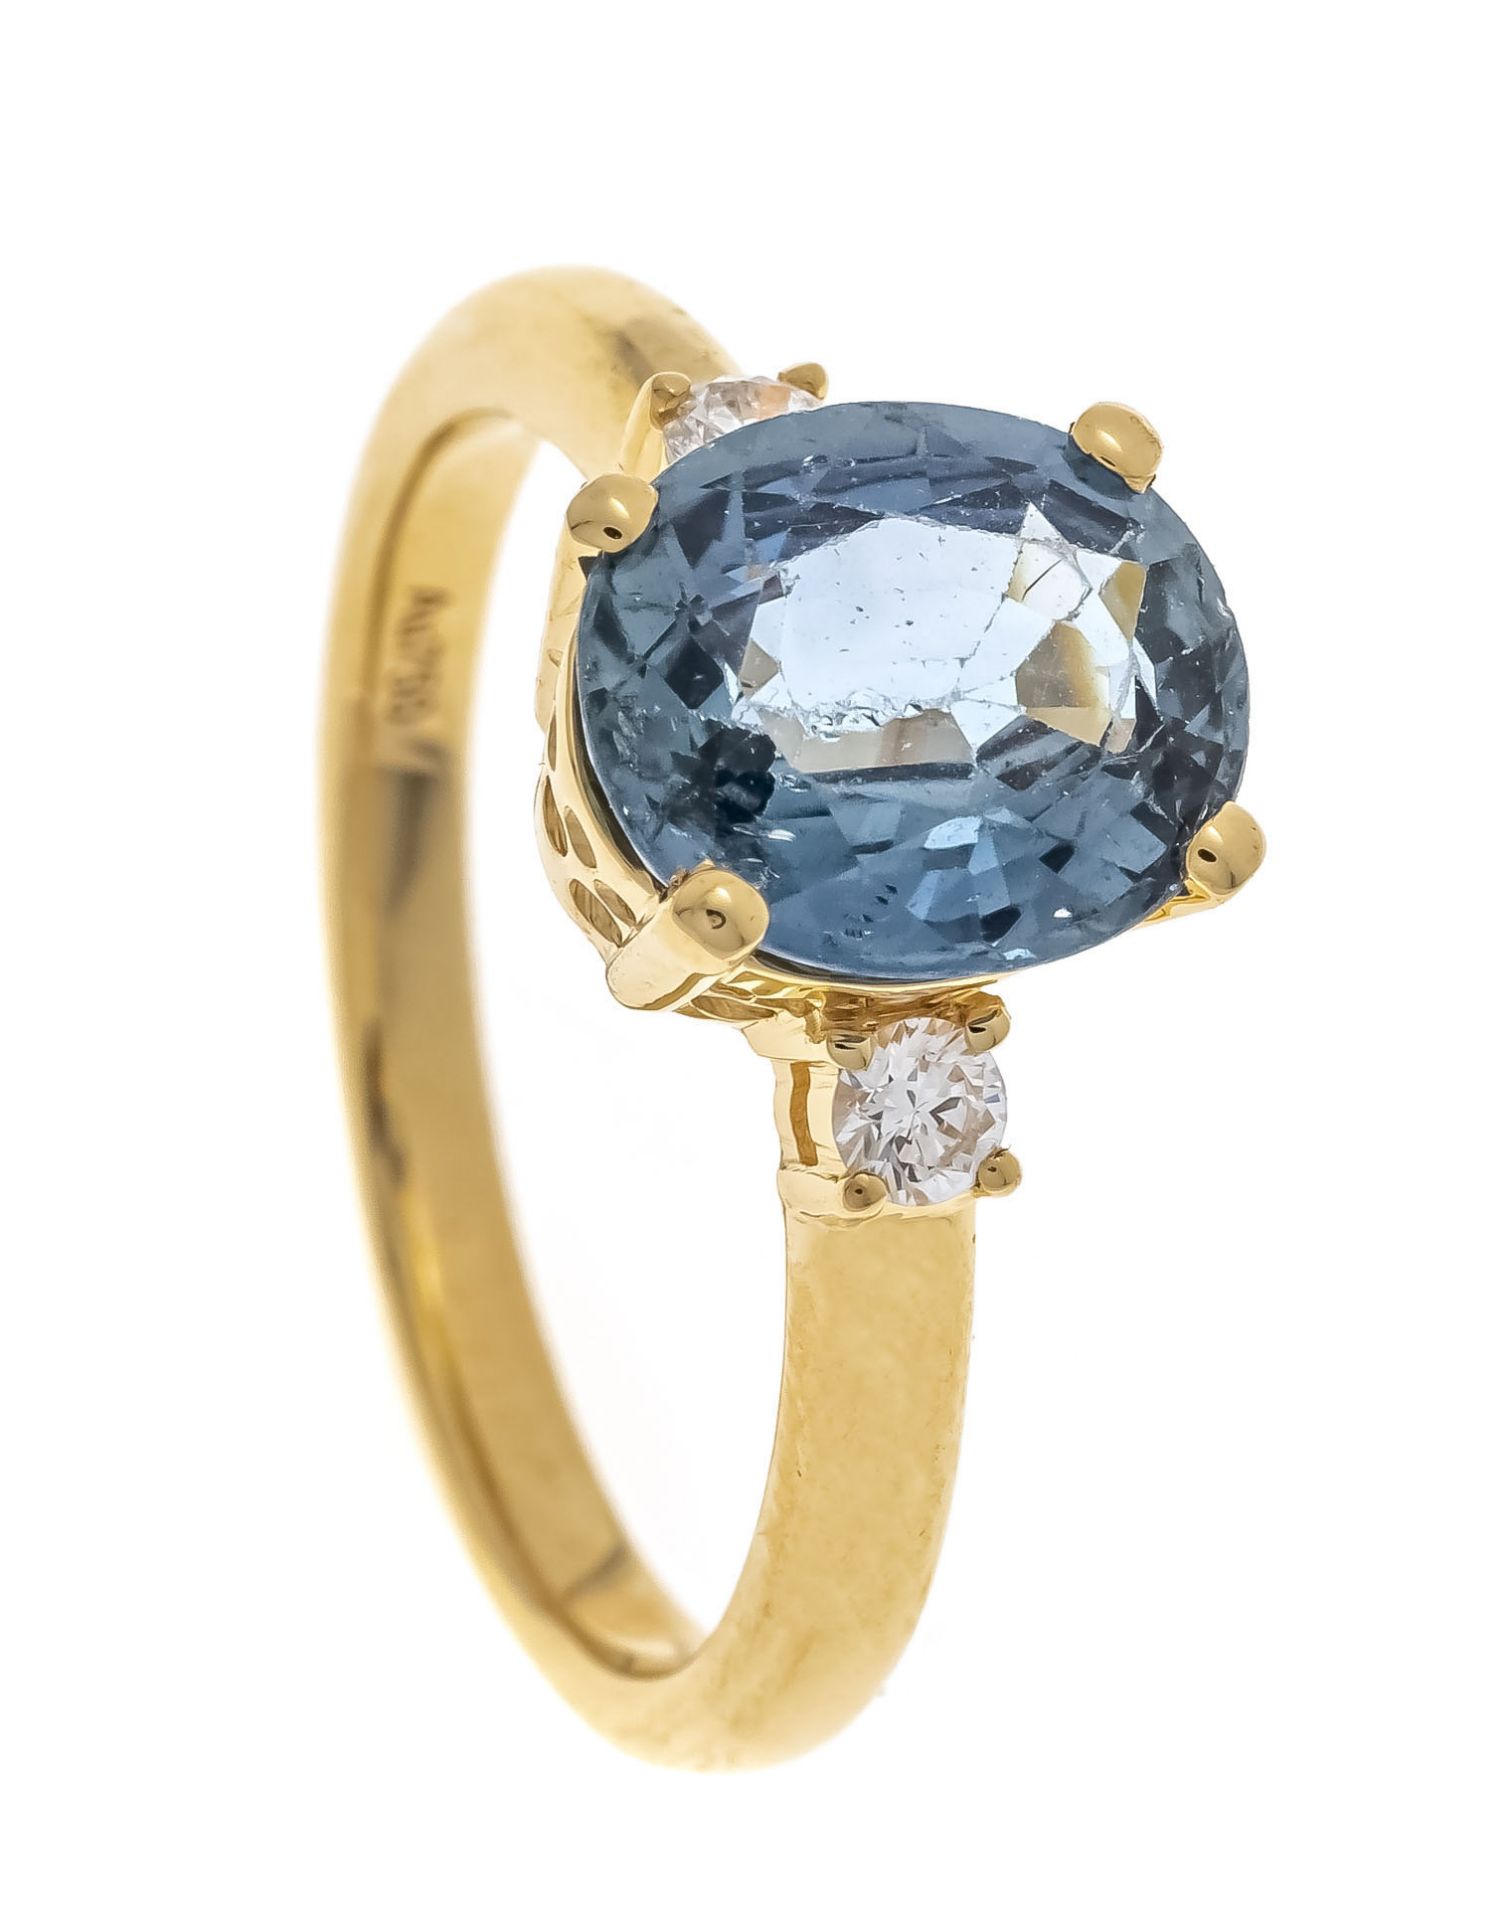 Sapphire diamond ring GG 750/000 with an oval faceted sapphire 2.2 ct lighter blue, eye clean -